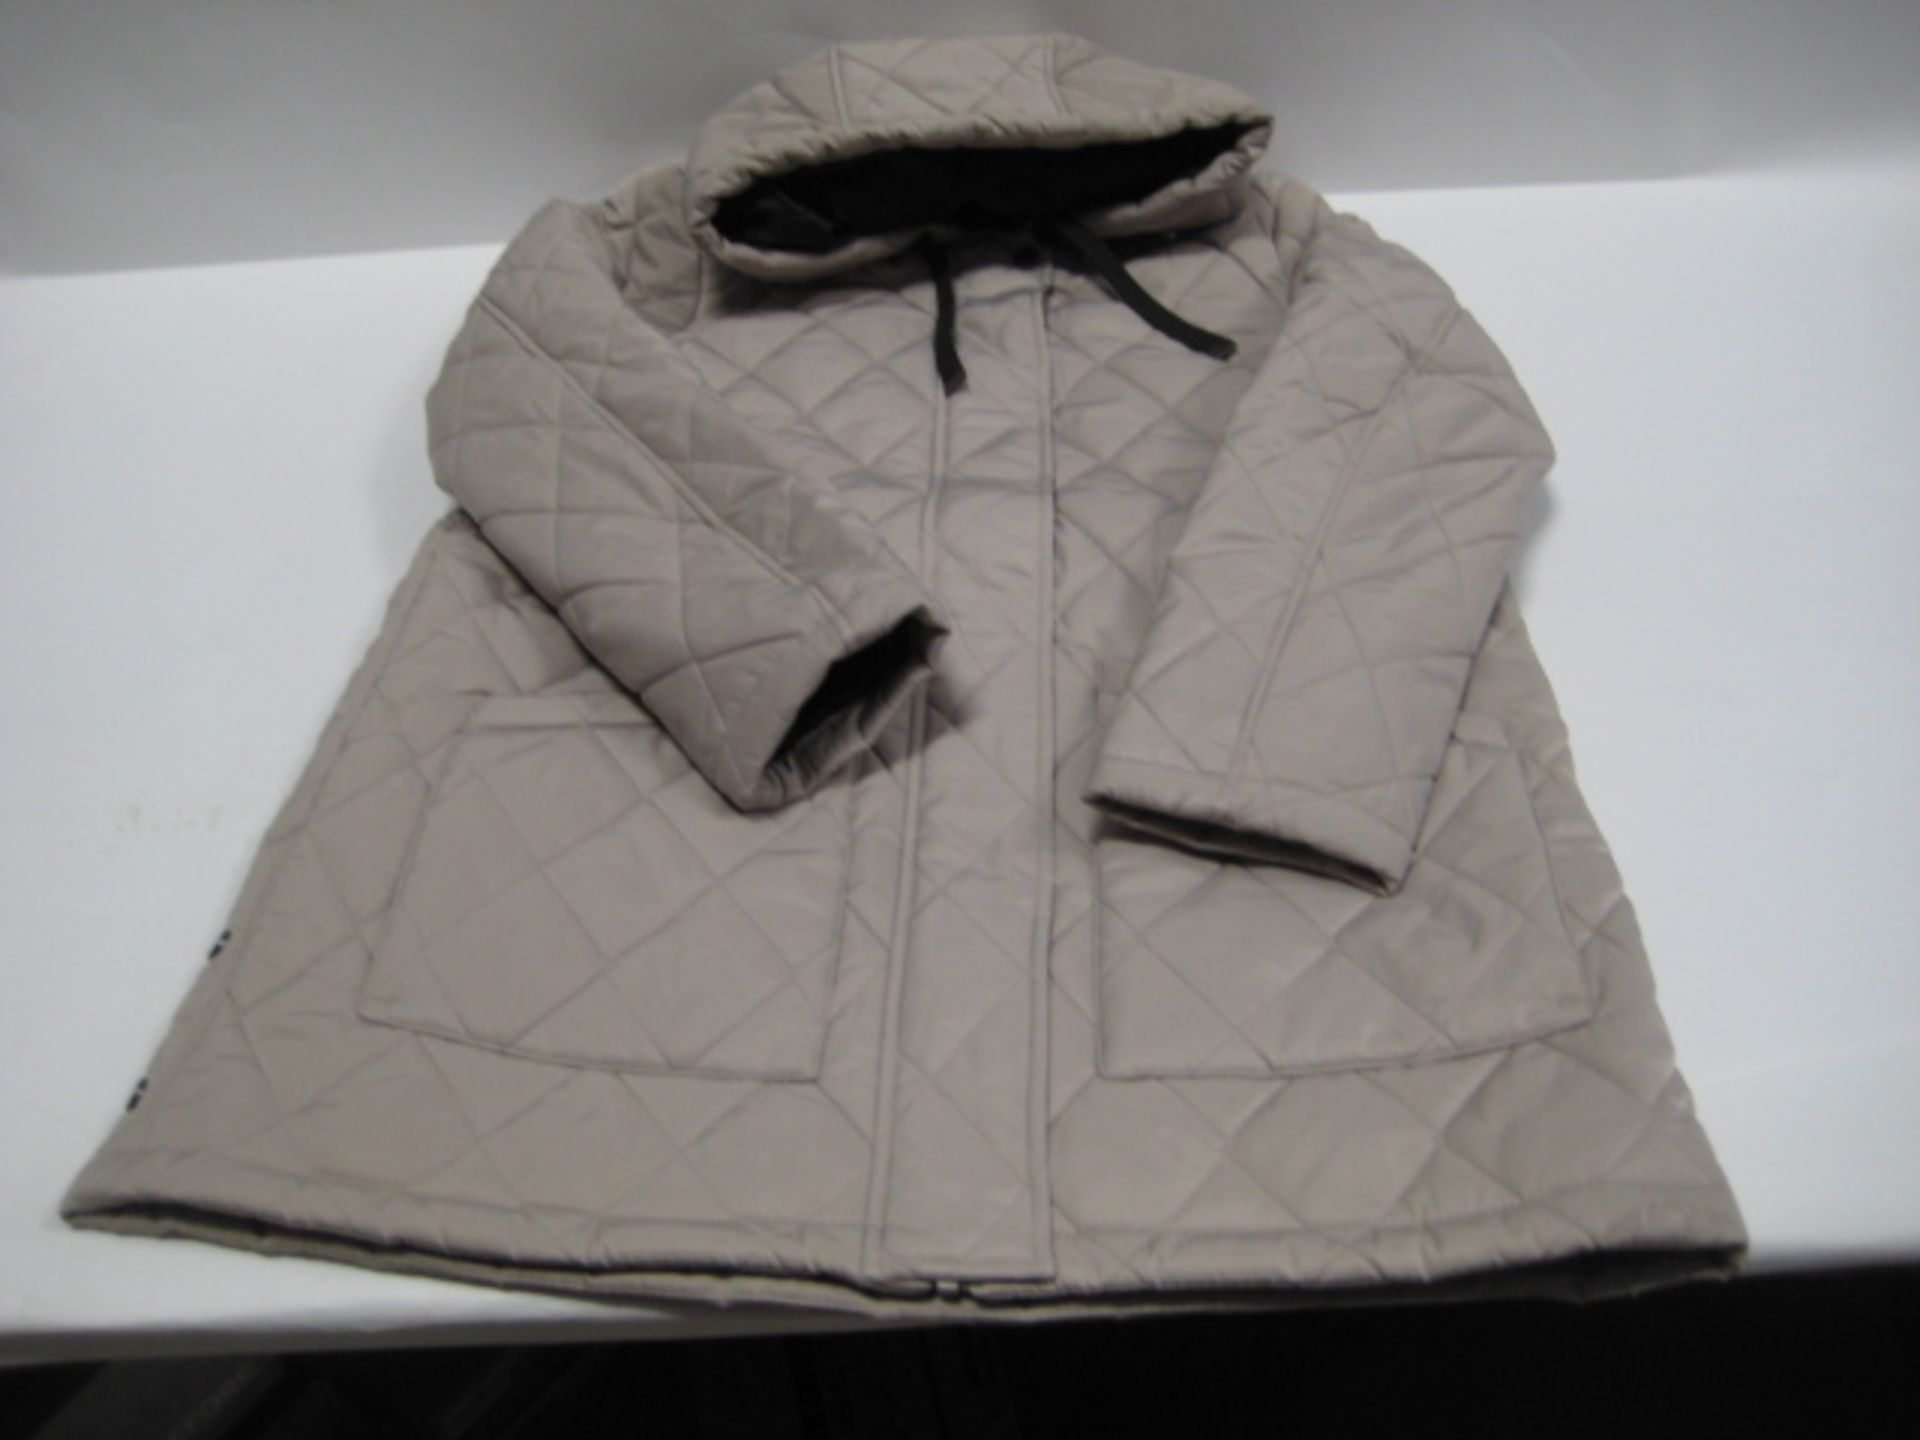 Box containing 16 weatherproof ladies quilted and hooded jackets in light beige